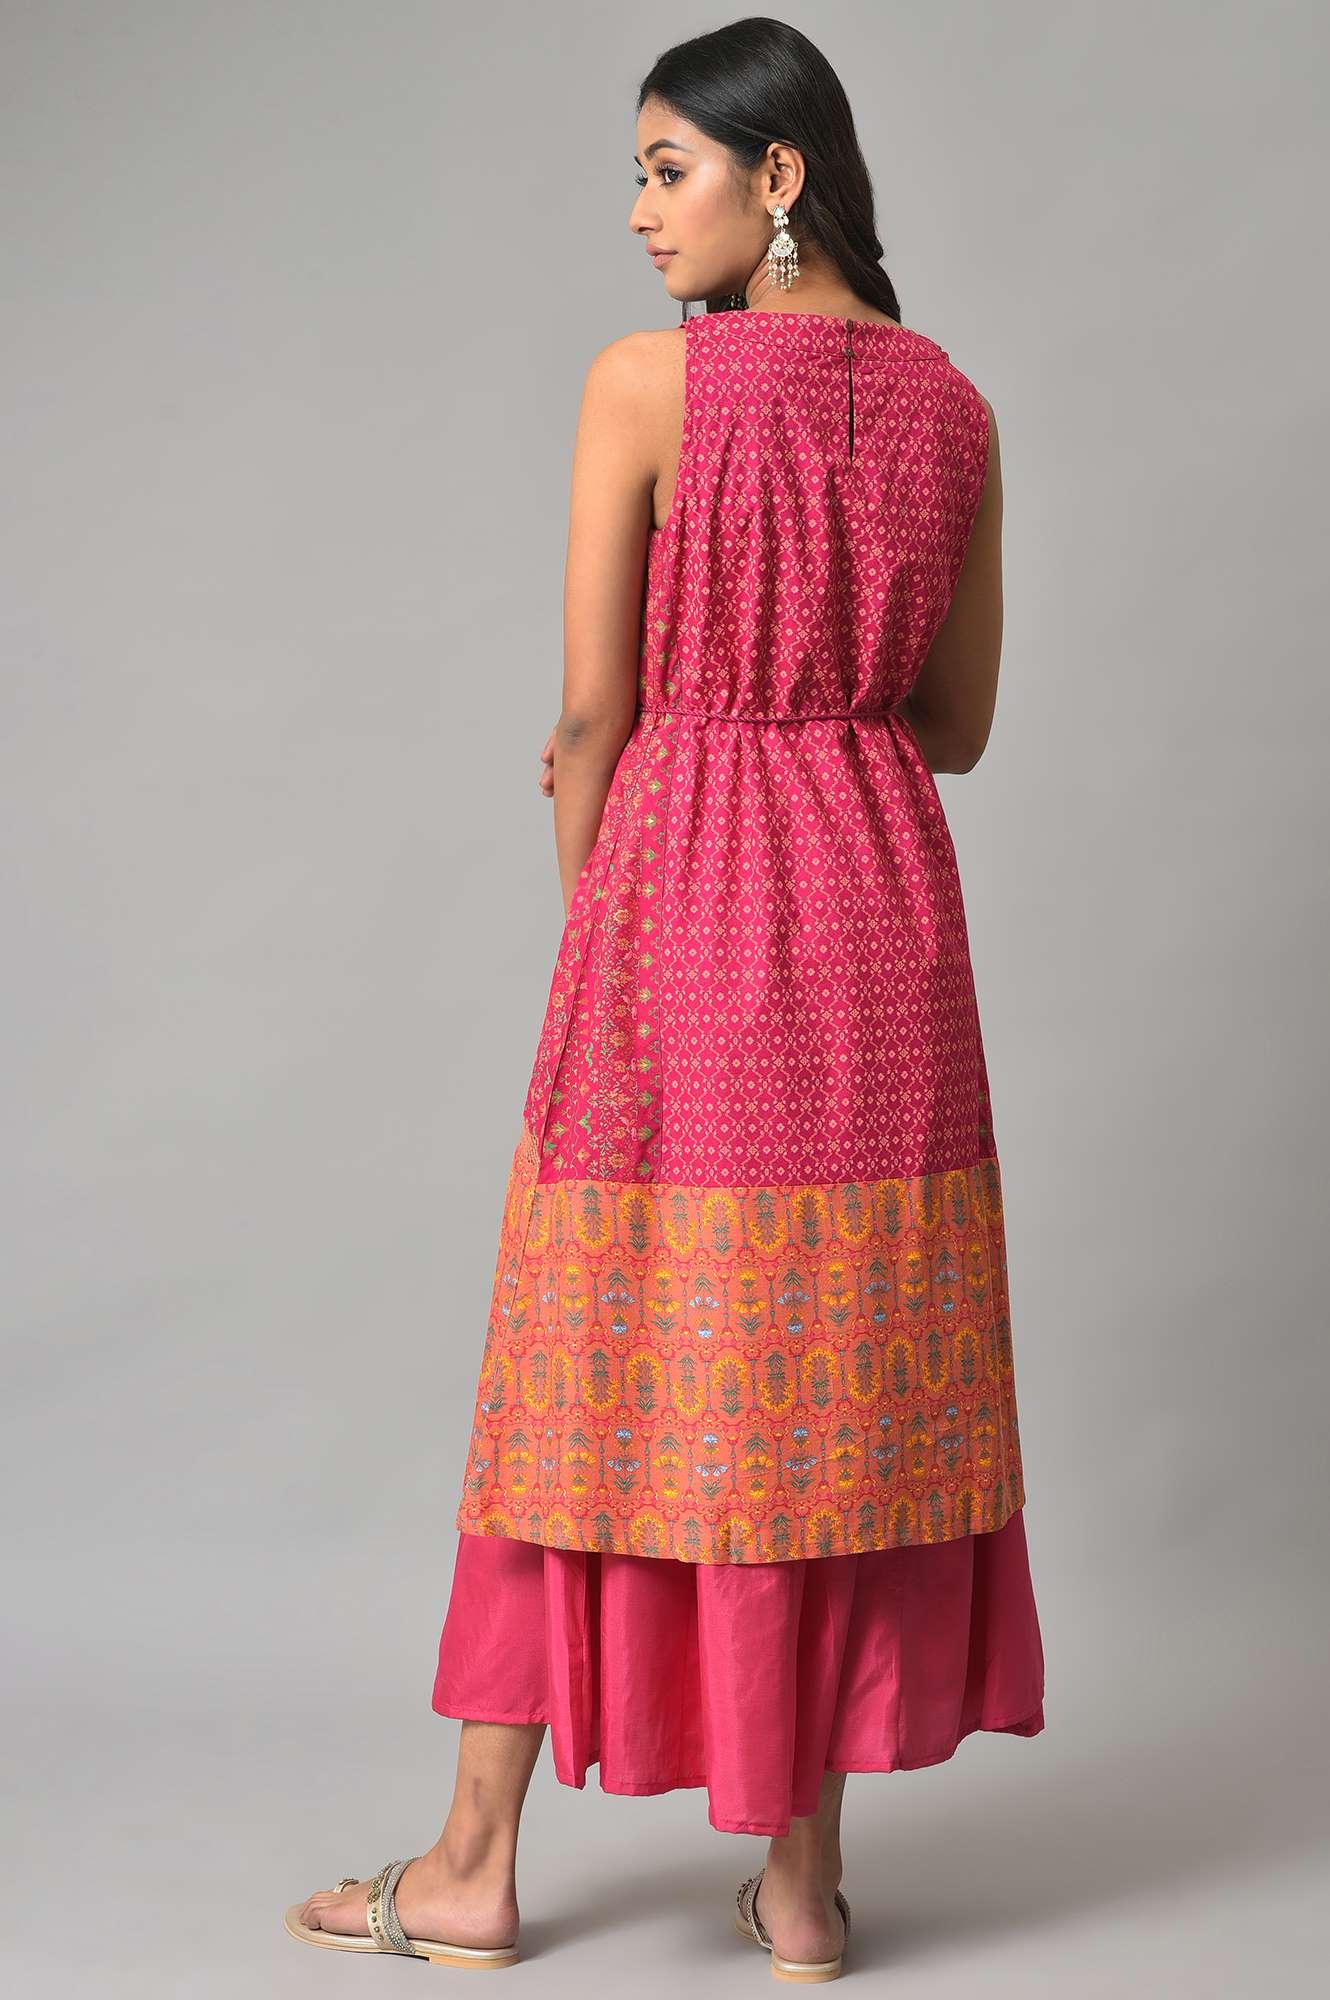 Dark Pink Sleeveless A-Line Dress With Embroidery - wforwoman